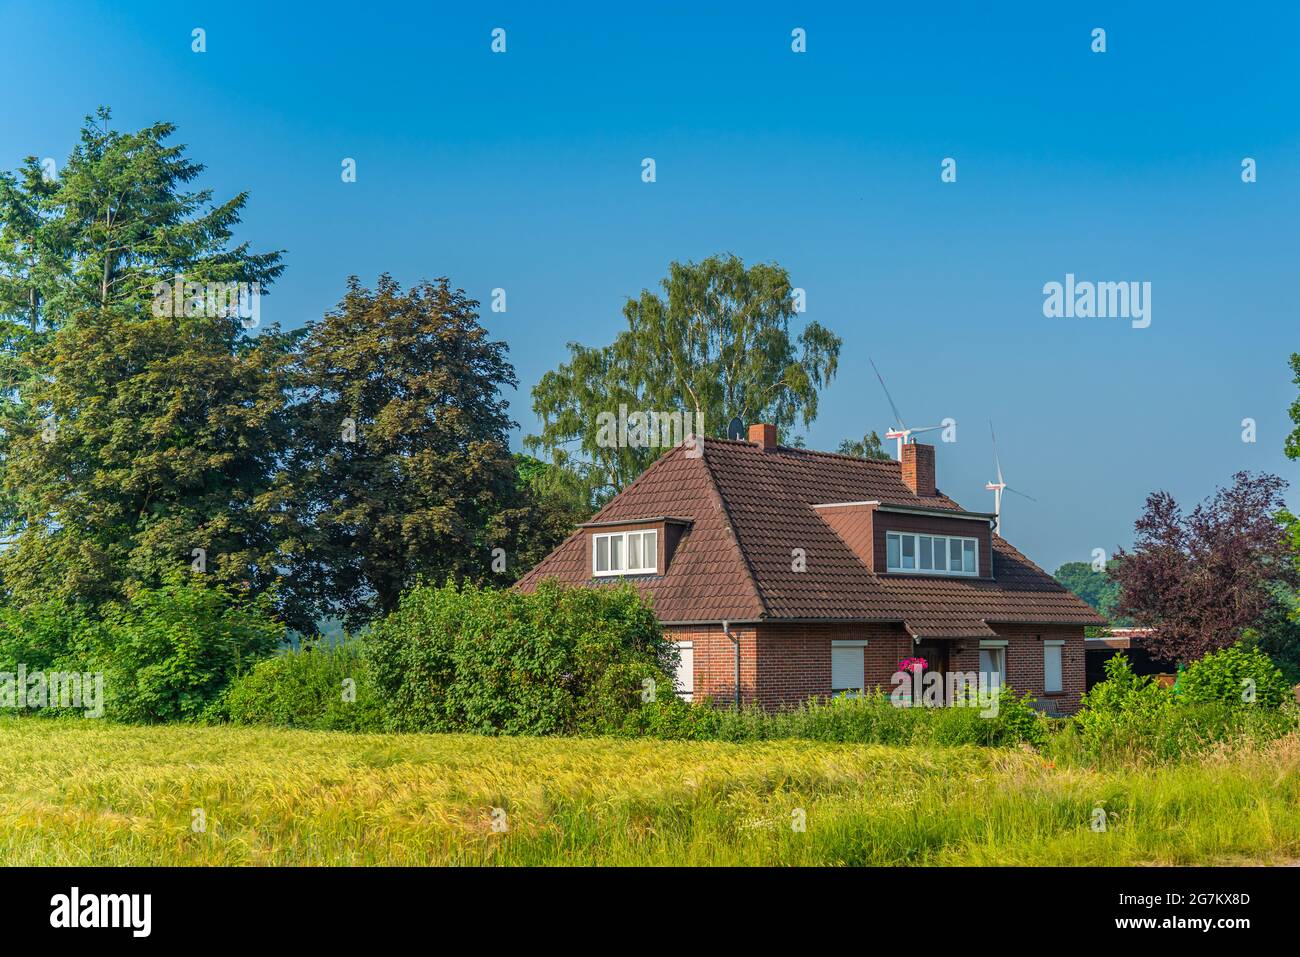 SANDKRUG, GERMANY JUNE 18.2021: Country house in Sandkrug, example of builing in a village in the Oldenburg country, Lower Saxony, Germany Stock Photo